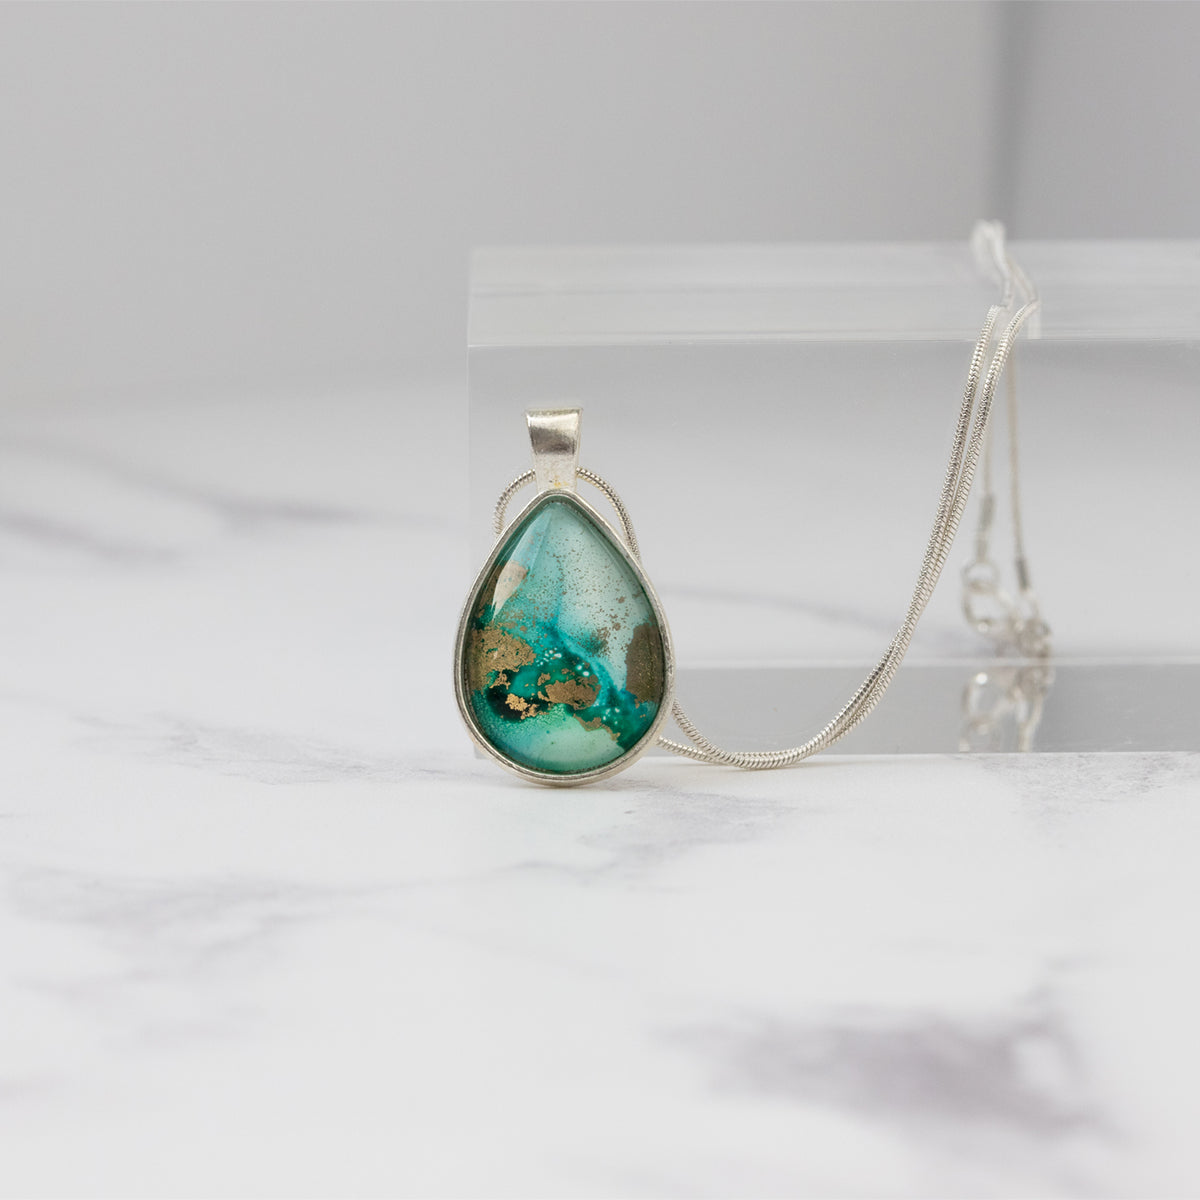 Teal & Gold Tear Drop Shaped Necklace